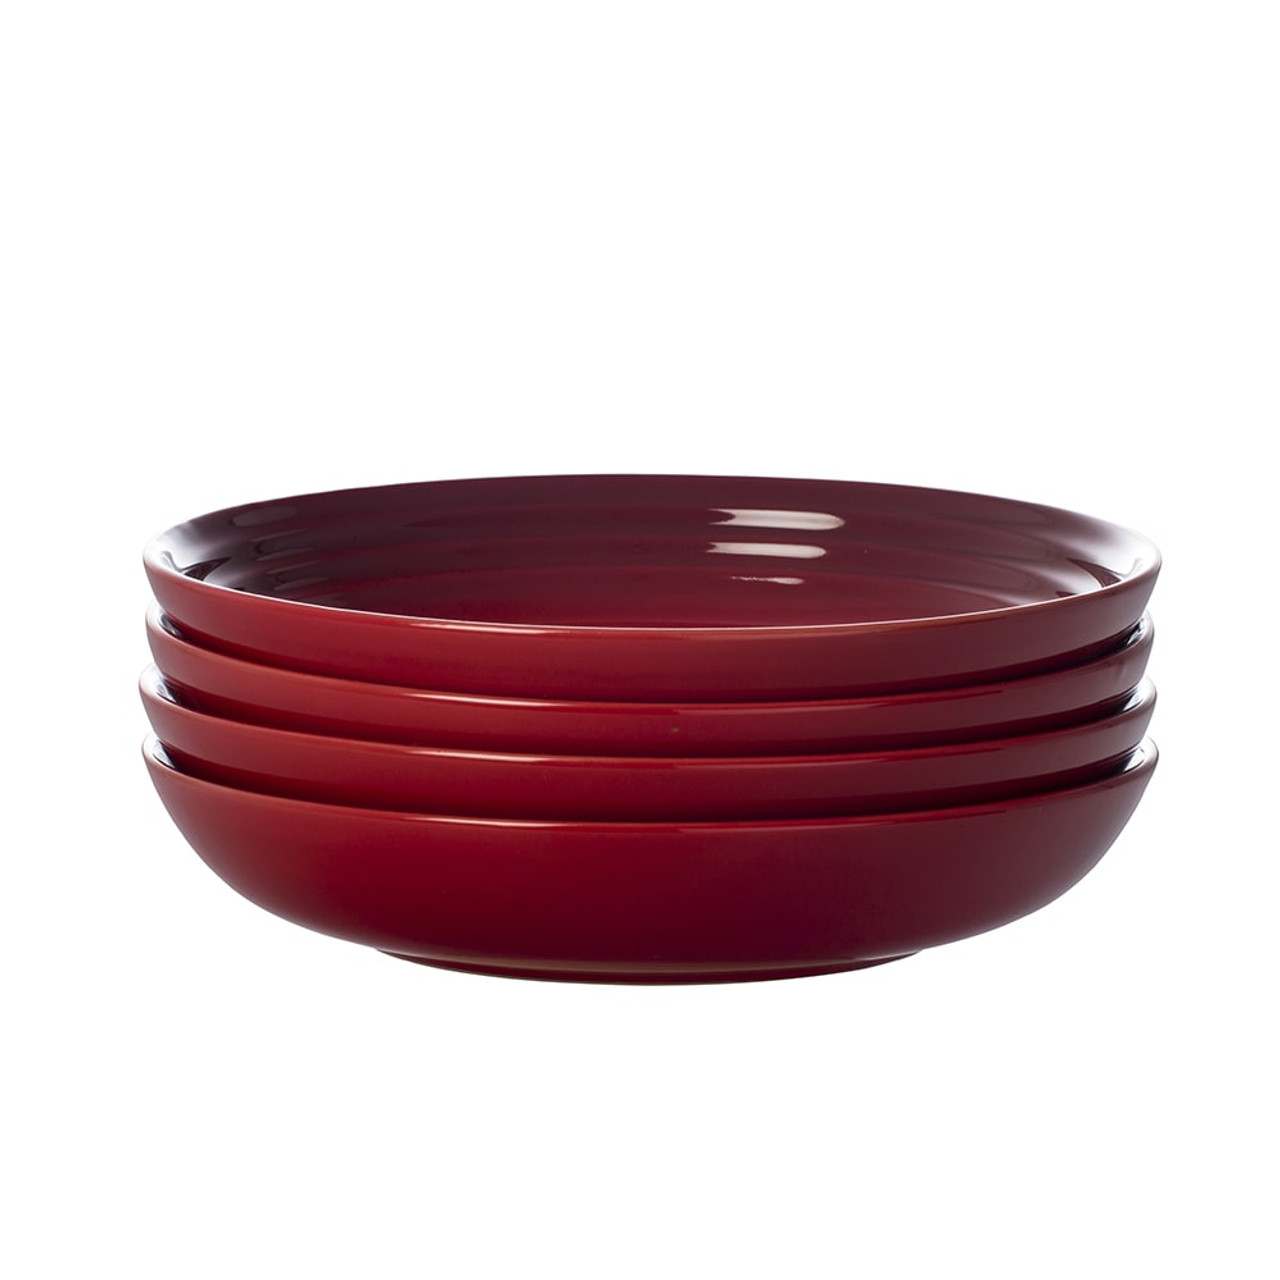 https://cdn11.bigcommerce.com/s-hccytny0od/images/stencil/1280x1280/products/2083/6781/le-creuset-pasta-bowls-cerise-8-inch__23668.1589126349.jpg?c=2?imbypass=on